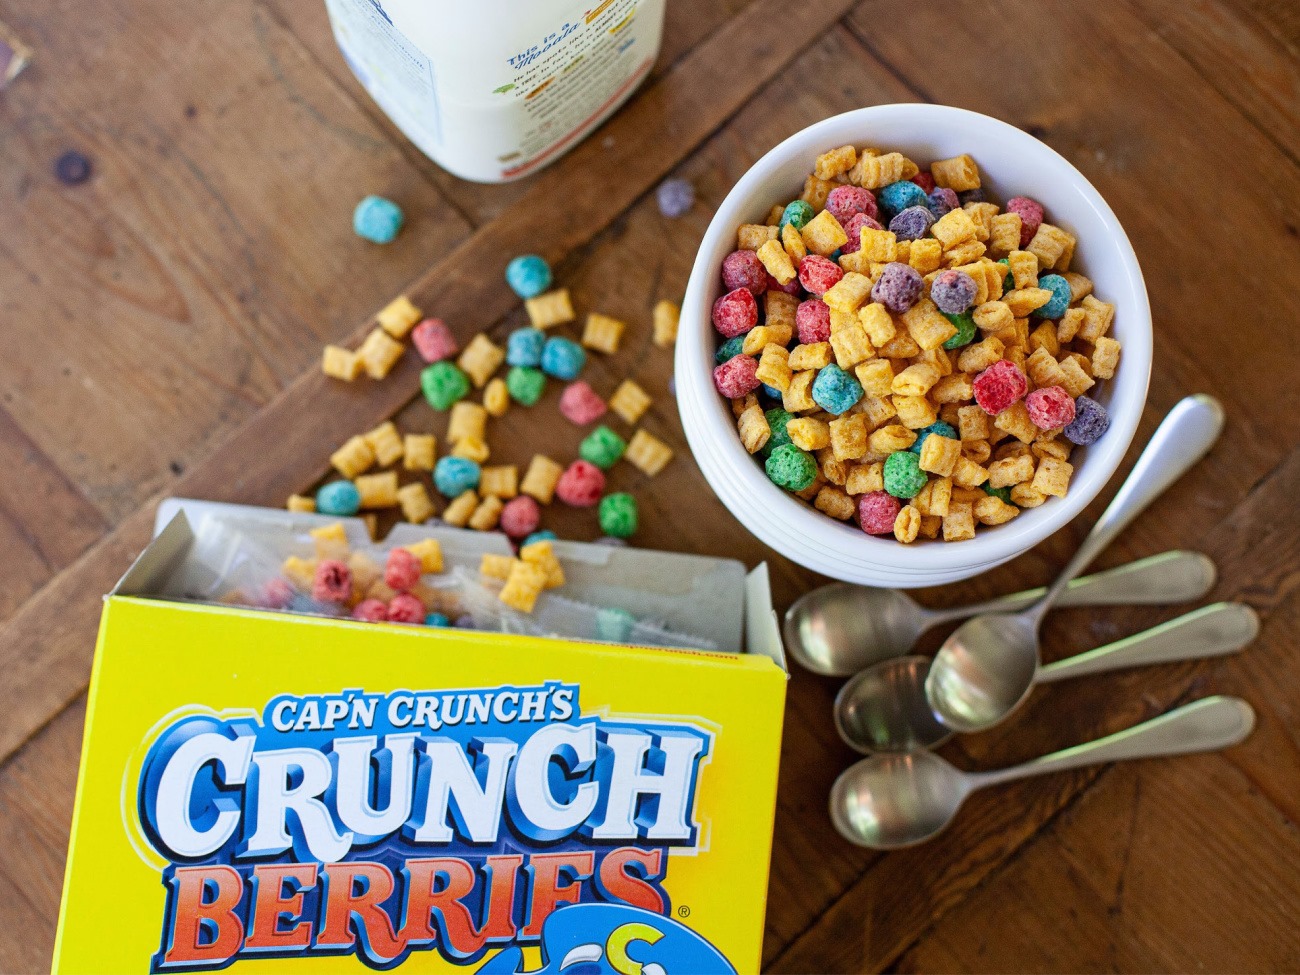 Grab The Boxes Of Quaker Cap’n Crunch Or Life Cereal For Just $1.49 At Kroger